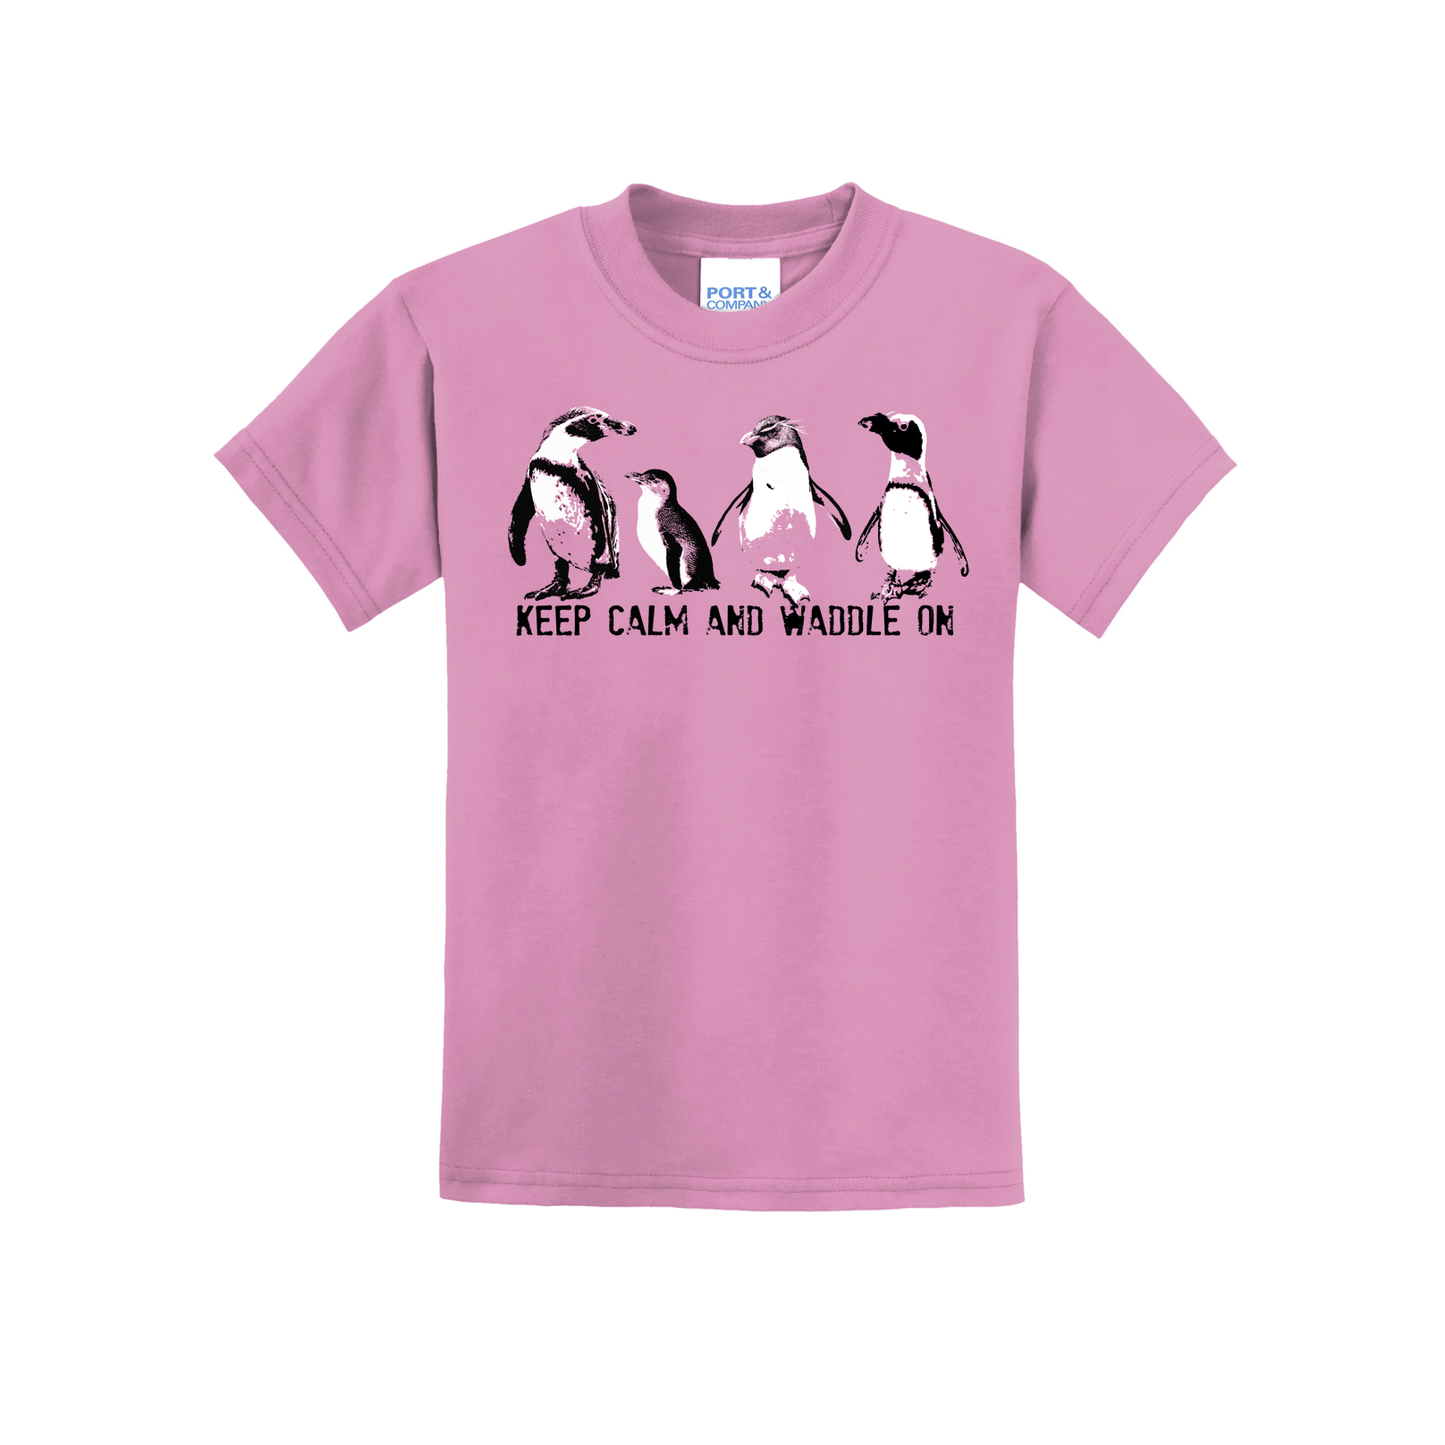 Penguins - Keep Calm and Waddle on - YOUTH Tee (Pre order)